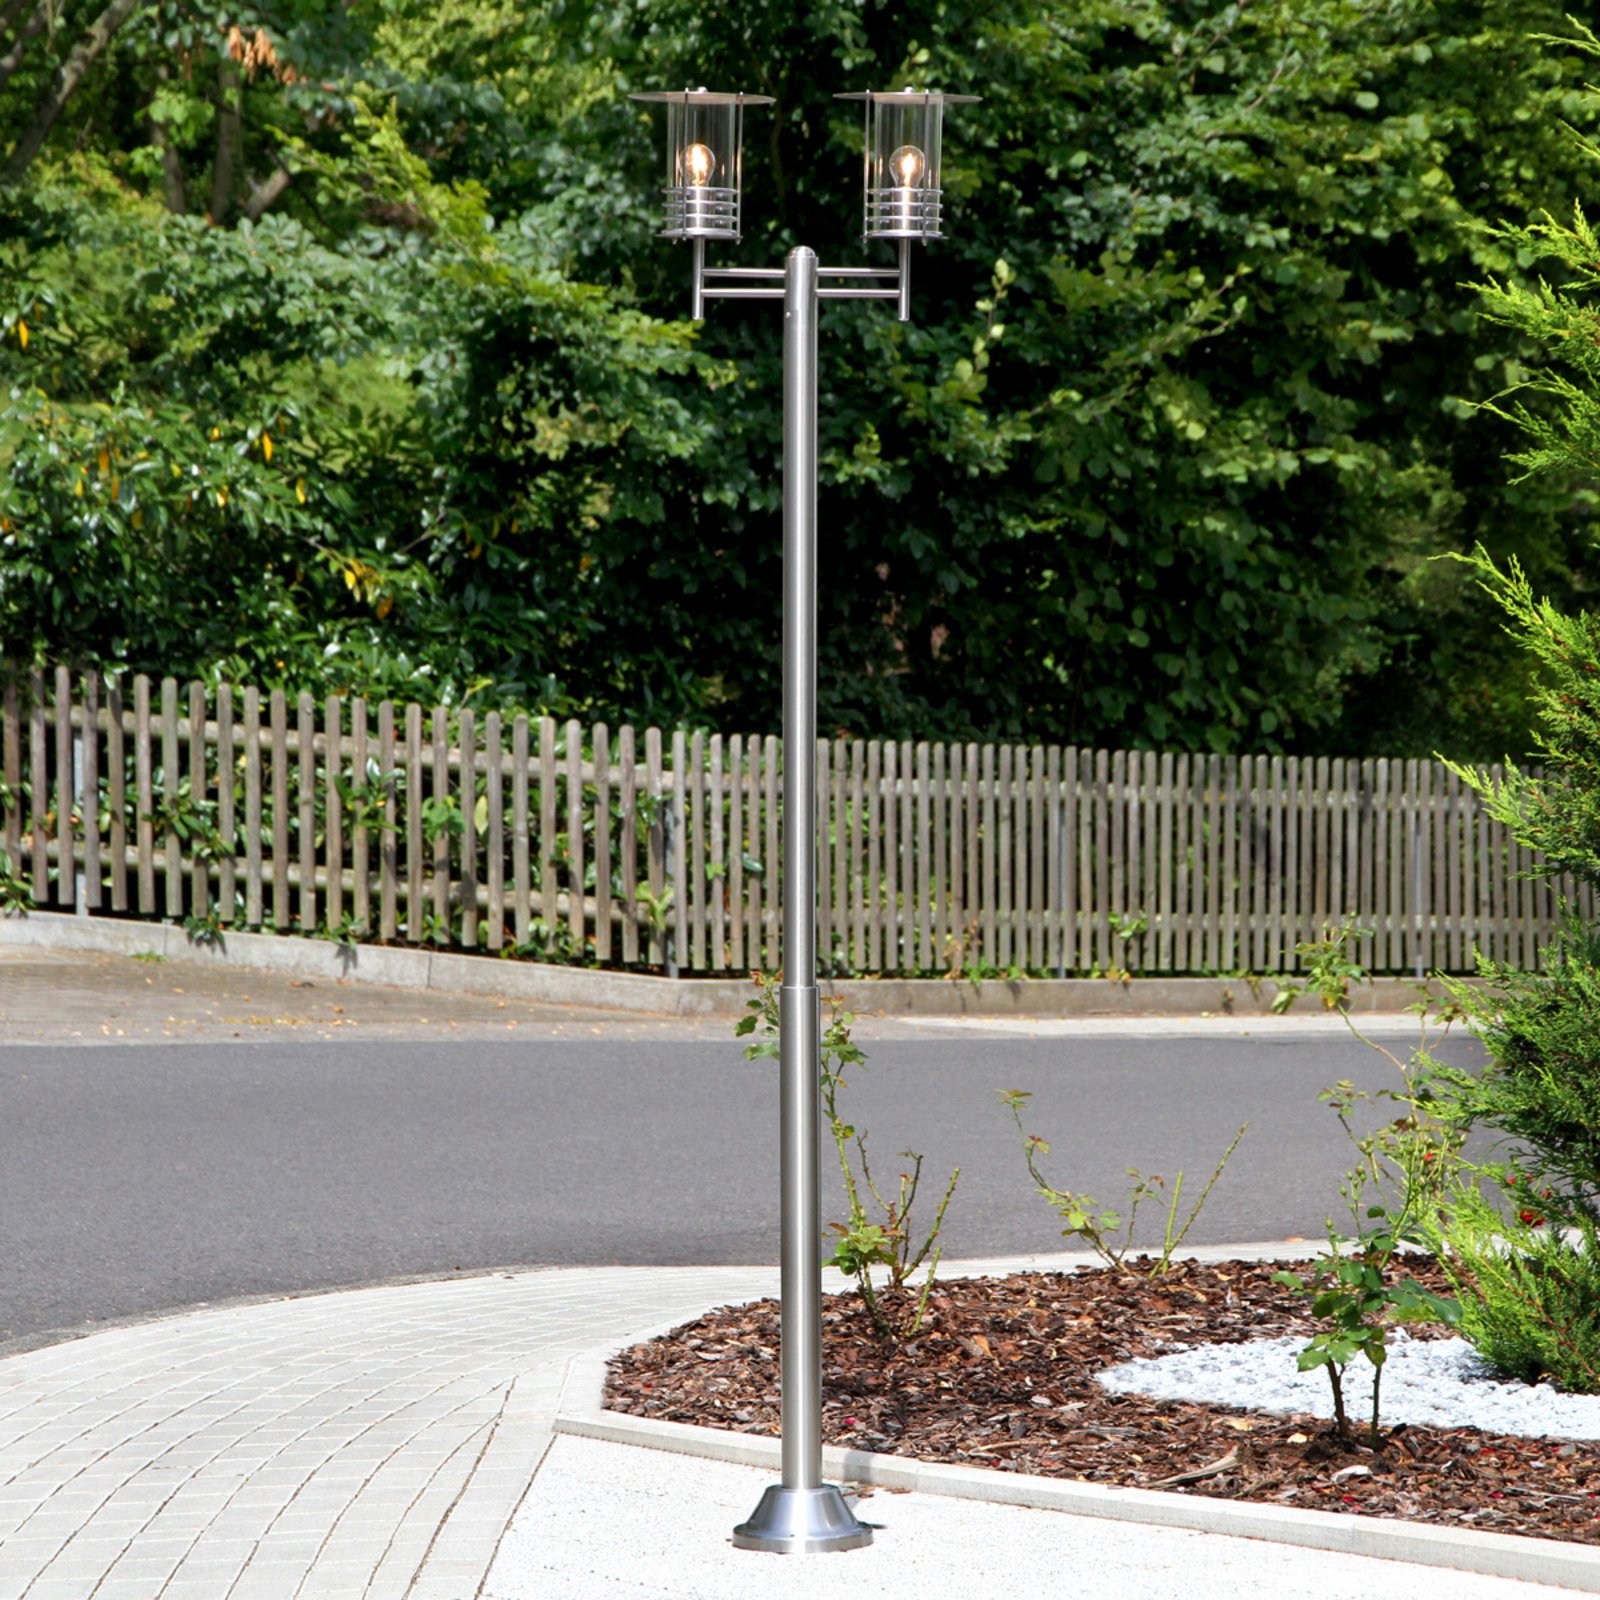 Lamp post Miko, stainless steel, 2-bulb